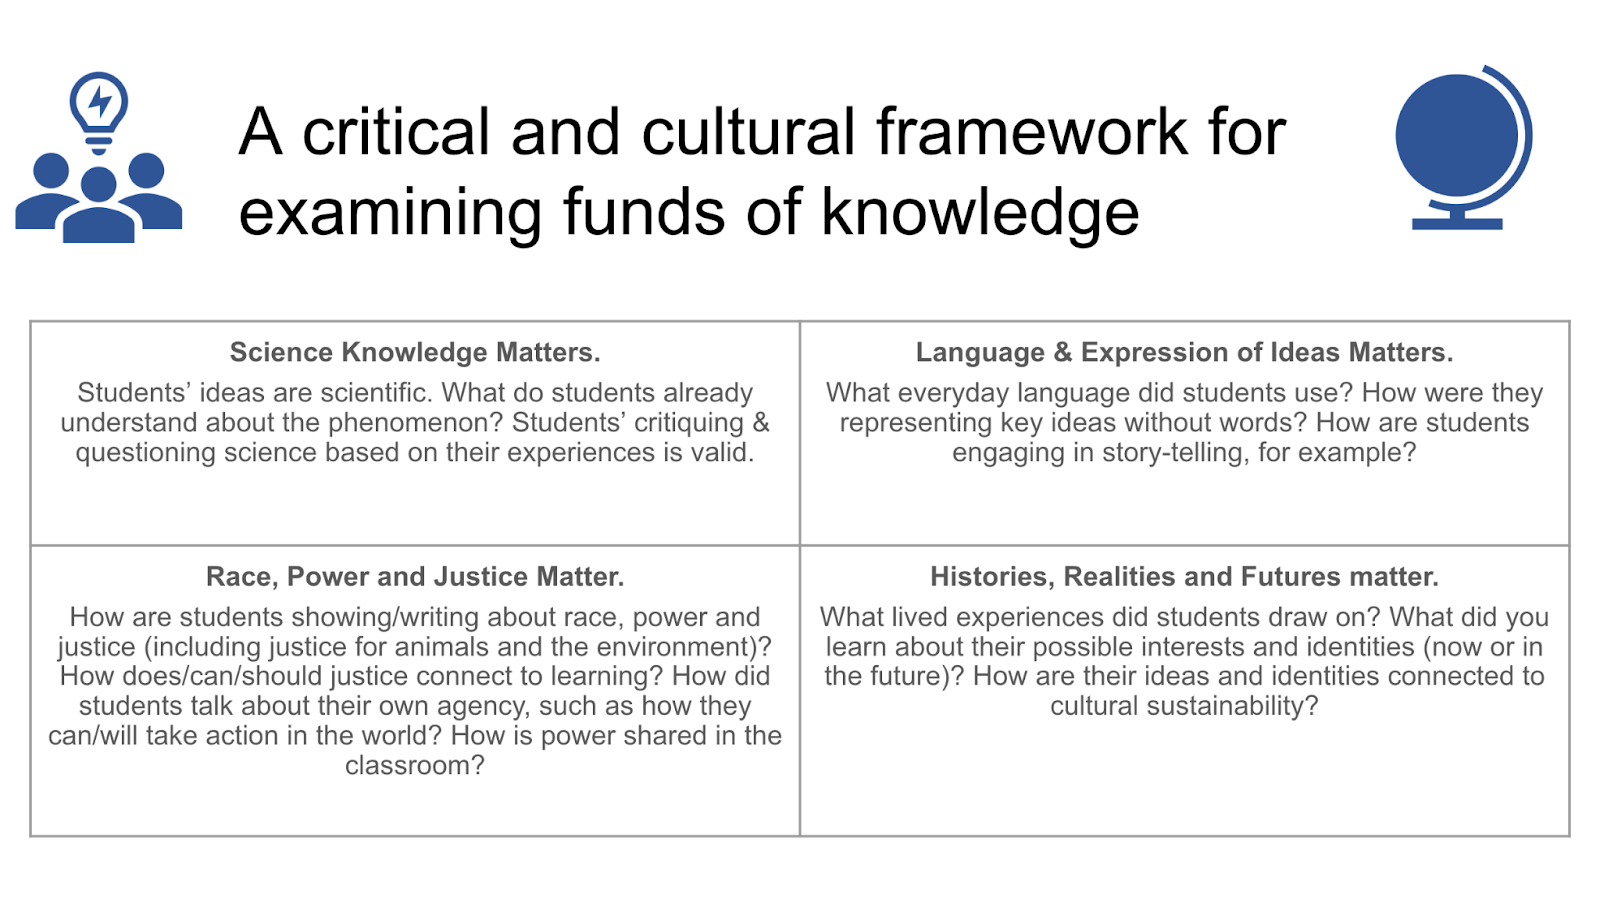 A critical and cultural framework for examining funds of knowledge. Science Knowledge Matters: Students' ideas are scientific. What do students already understand about the phenomenon? Students' critiquing & questioning science based on their experiences is valid. Race, Power and Justice Matter: How are students showing/writing about race, power, and justice (including justice for animals and the environment)? How does/can/should justice connect to learning? How did students talk about their own agency, such as how they can/will take action in the world? How is power shared in the classroom? Language & Expression of Ideas Matters: What everyday language did students use? How were they representing key ideas without words? How are students engaging in story-telling, for example? Histories, Realities and Futures Matter: What lived experiences did students draw on? What did you learn about their possible interests and identities (now or in the future)? How are their ideas and identities connected to cultural sustainability? 